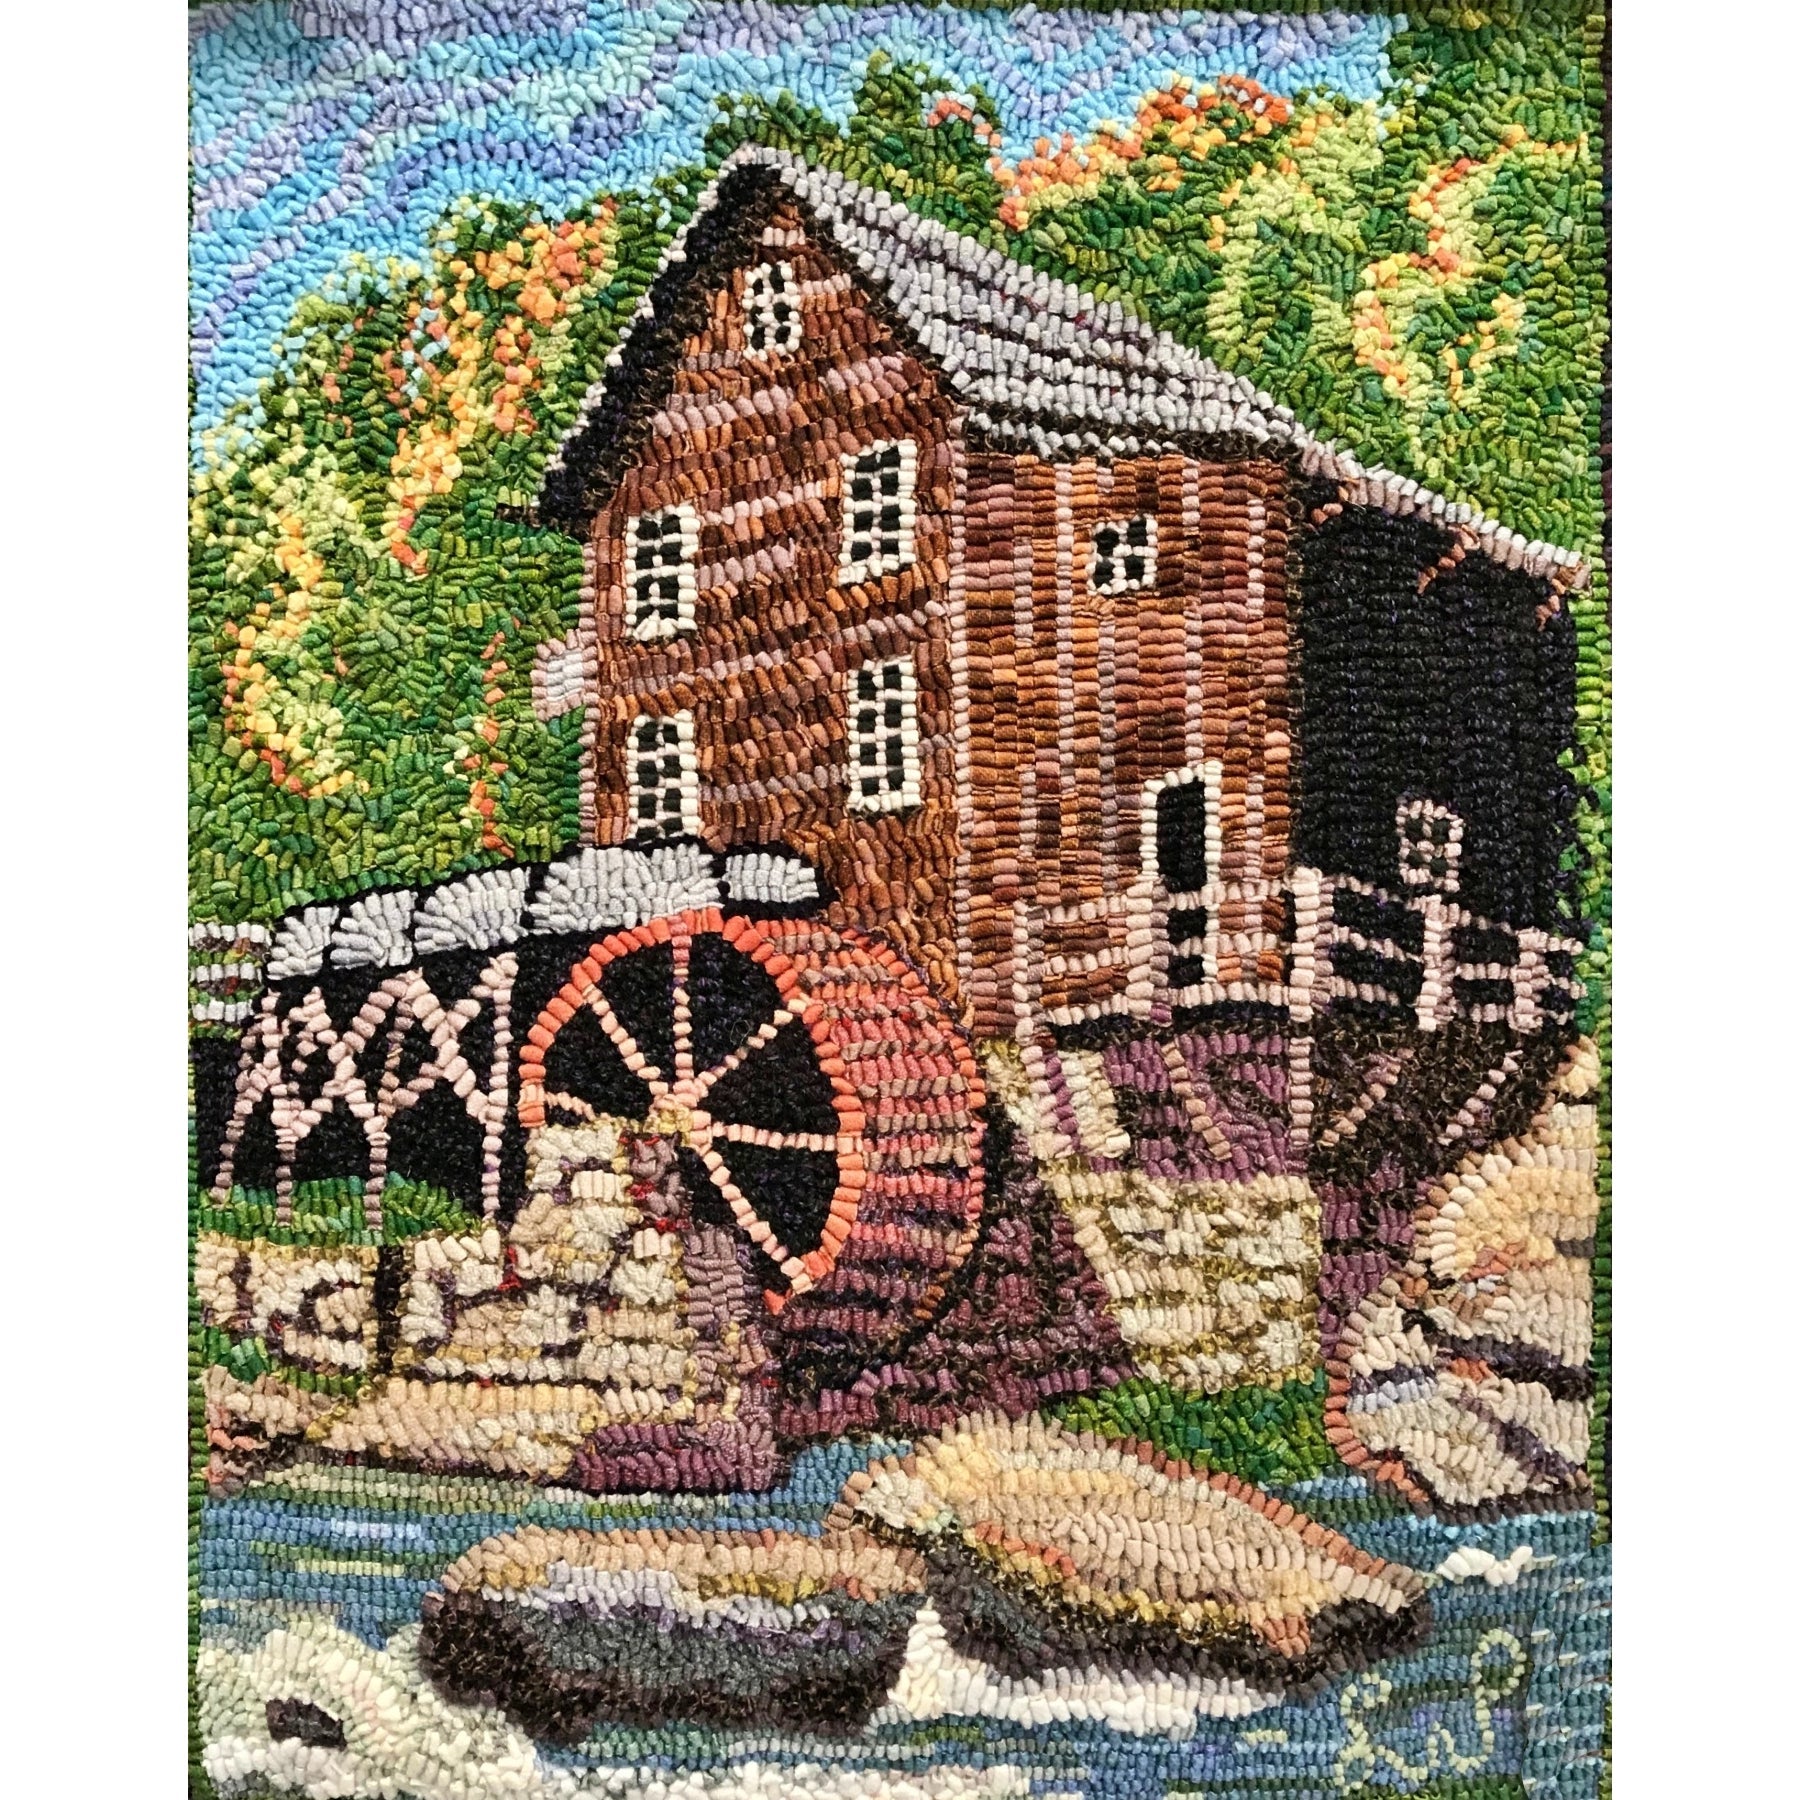 Glade Creek Grist Mill, rug hooked by Laura Pierce